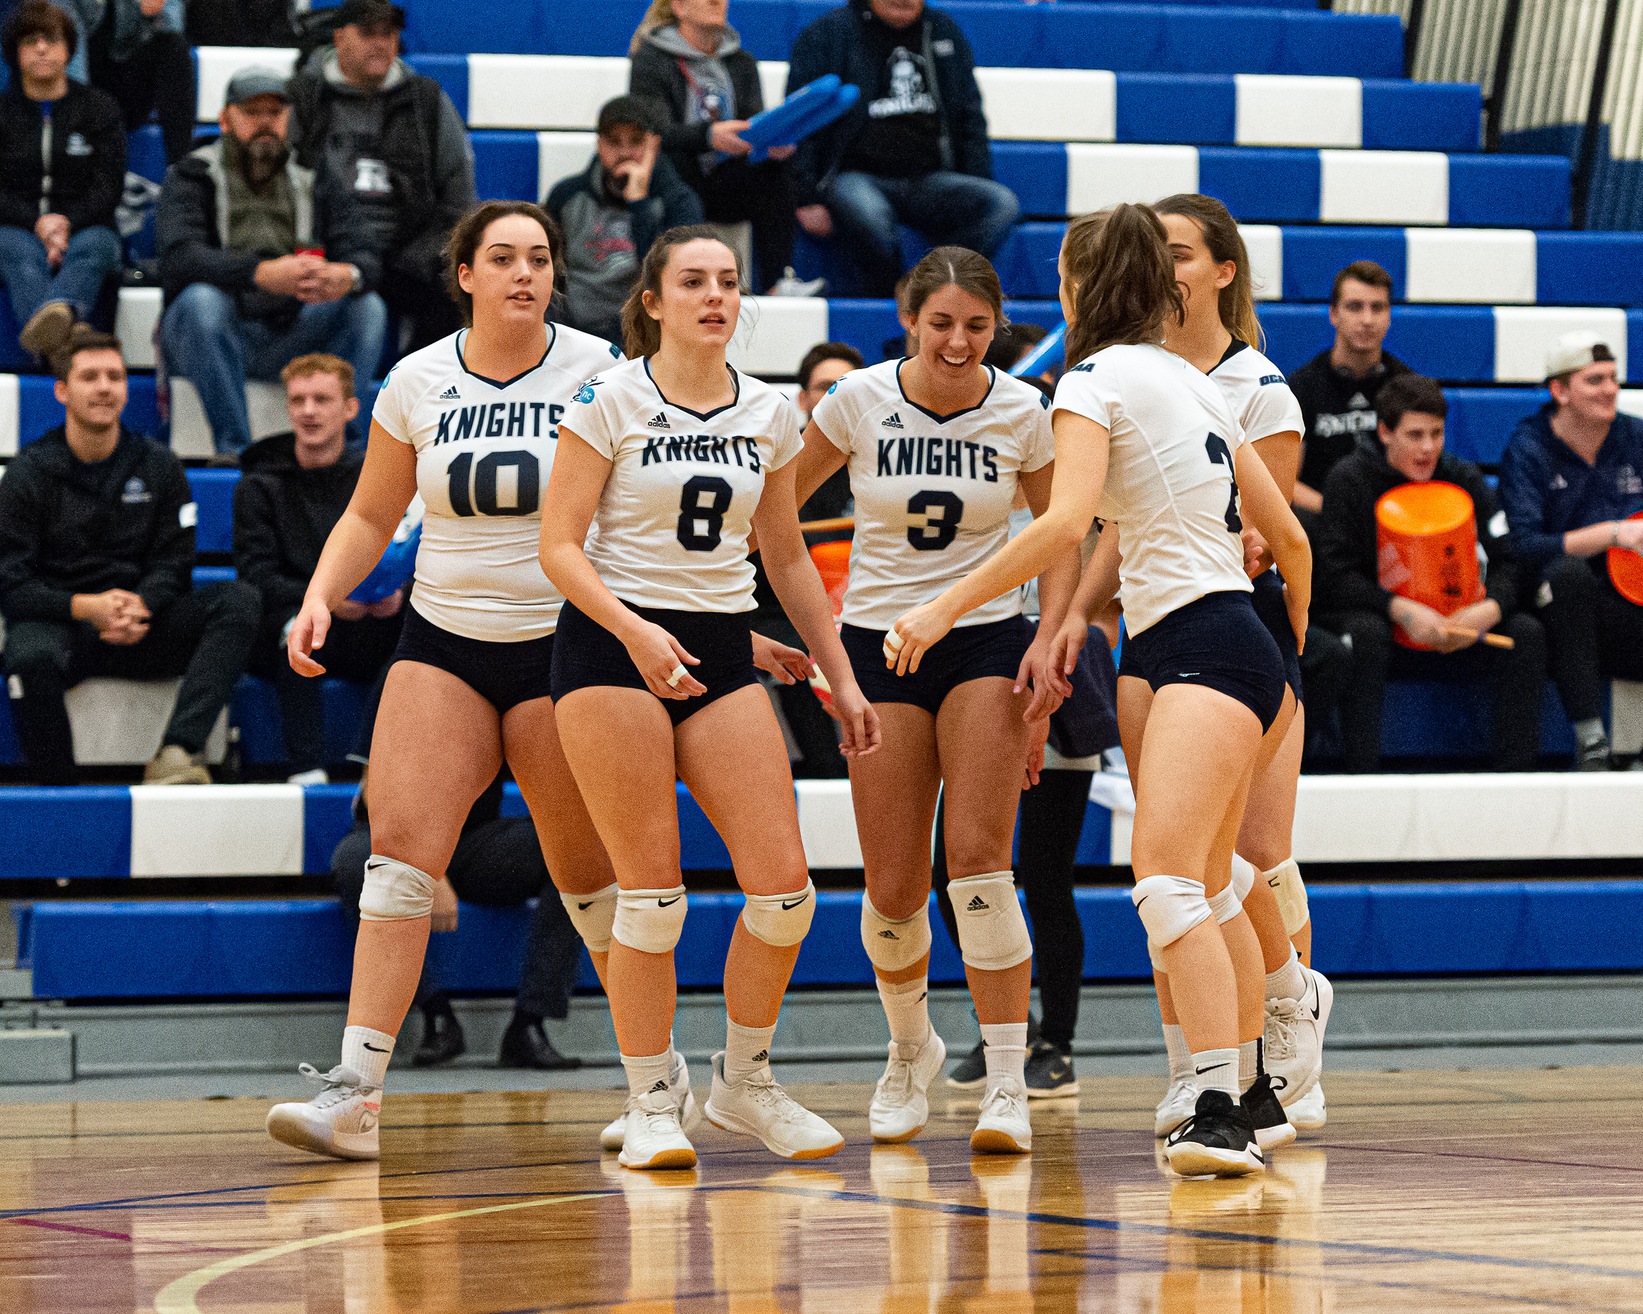 Women's Volleyball Sweeps Visiting Condors in Home Opener